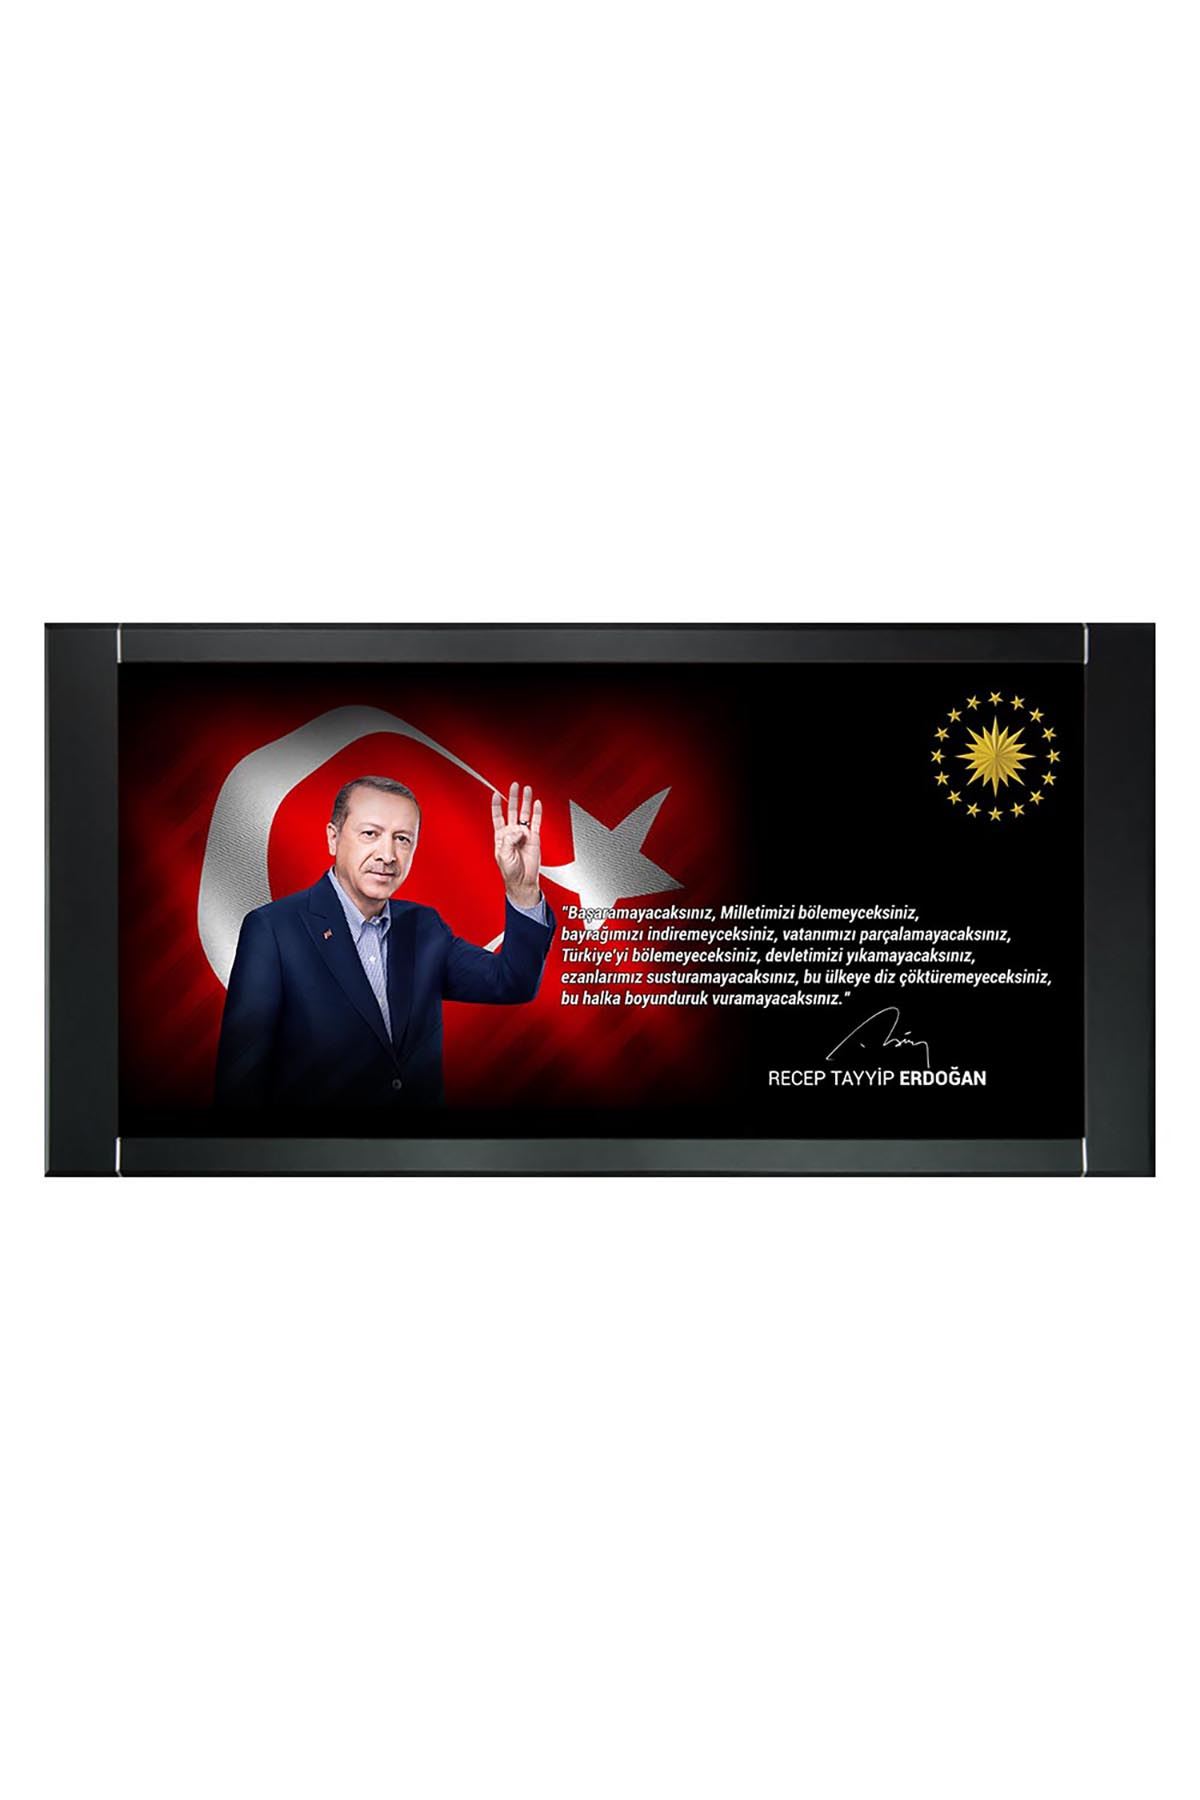 Atatürk Printed Manager Board | Printed Manager Board | Leather Framed Board | High Quality Manager Board 